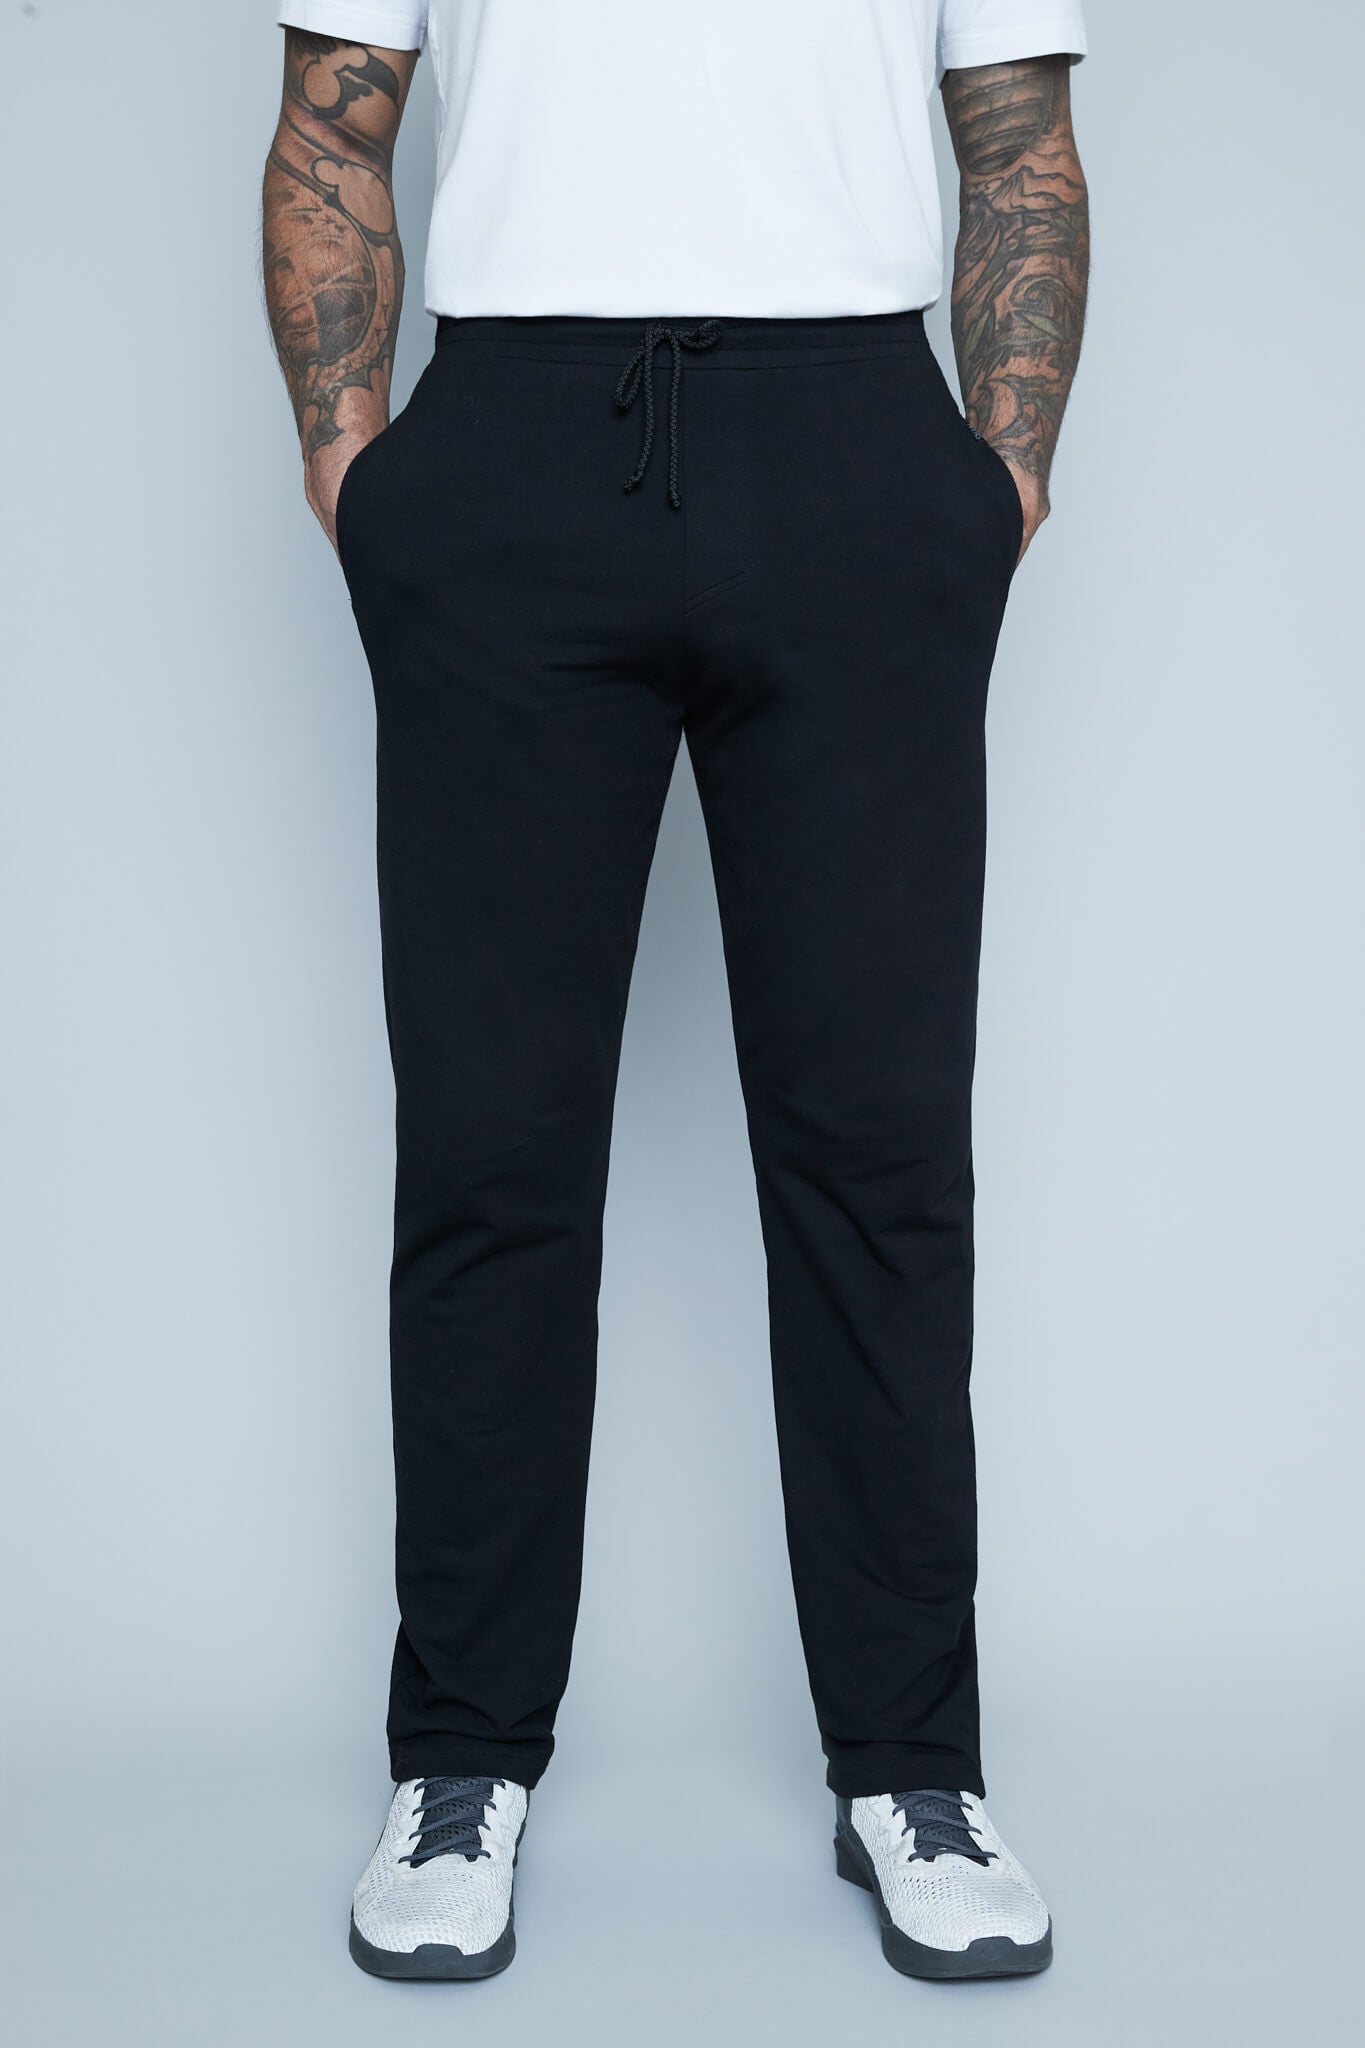 Pants for tall men in black by Navas Lab. The perfect mens tall pants for tall guys looking for style and comfort.